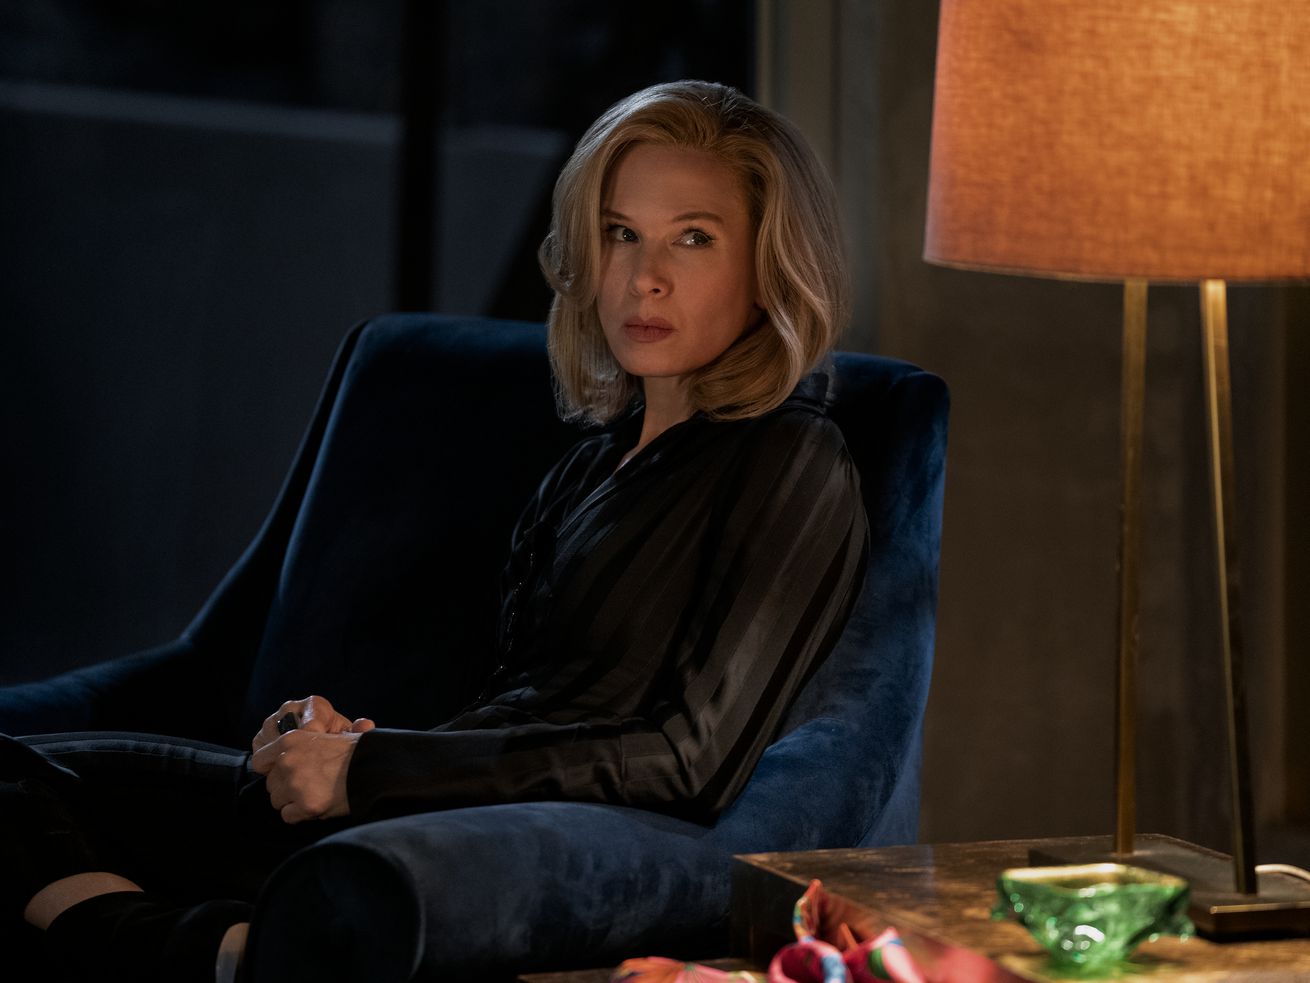 Renee Zellweger plays a conniving venture capitalist in the Netflix series “What/If.”